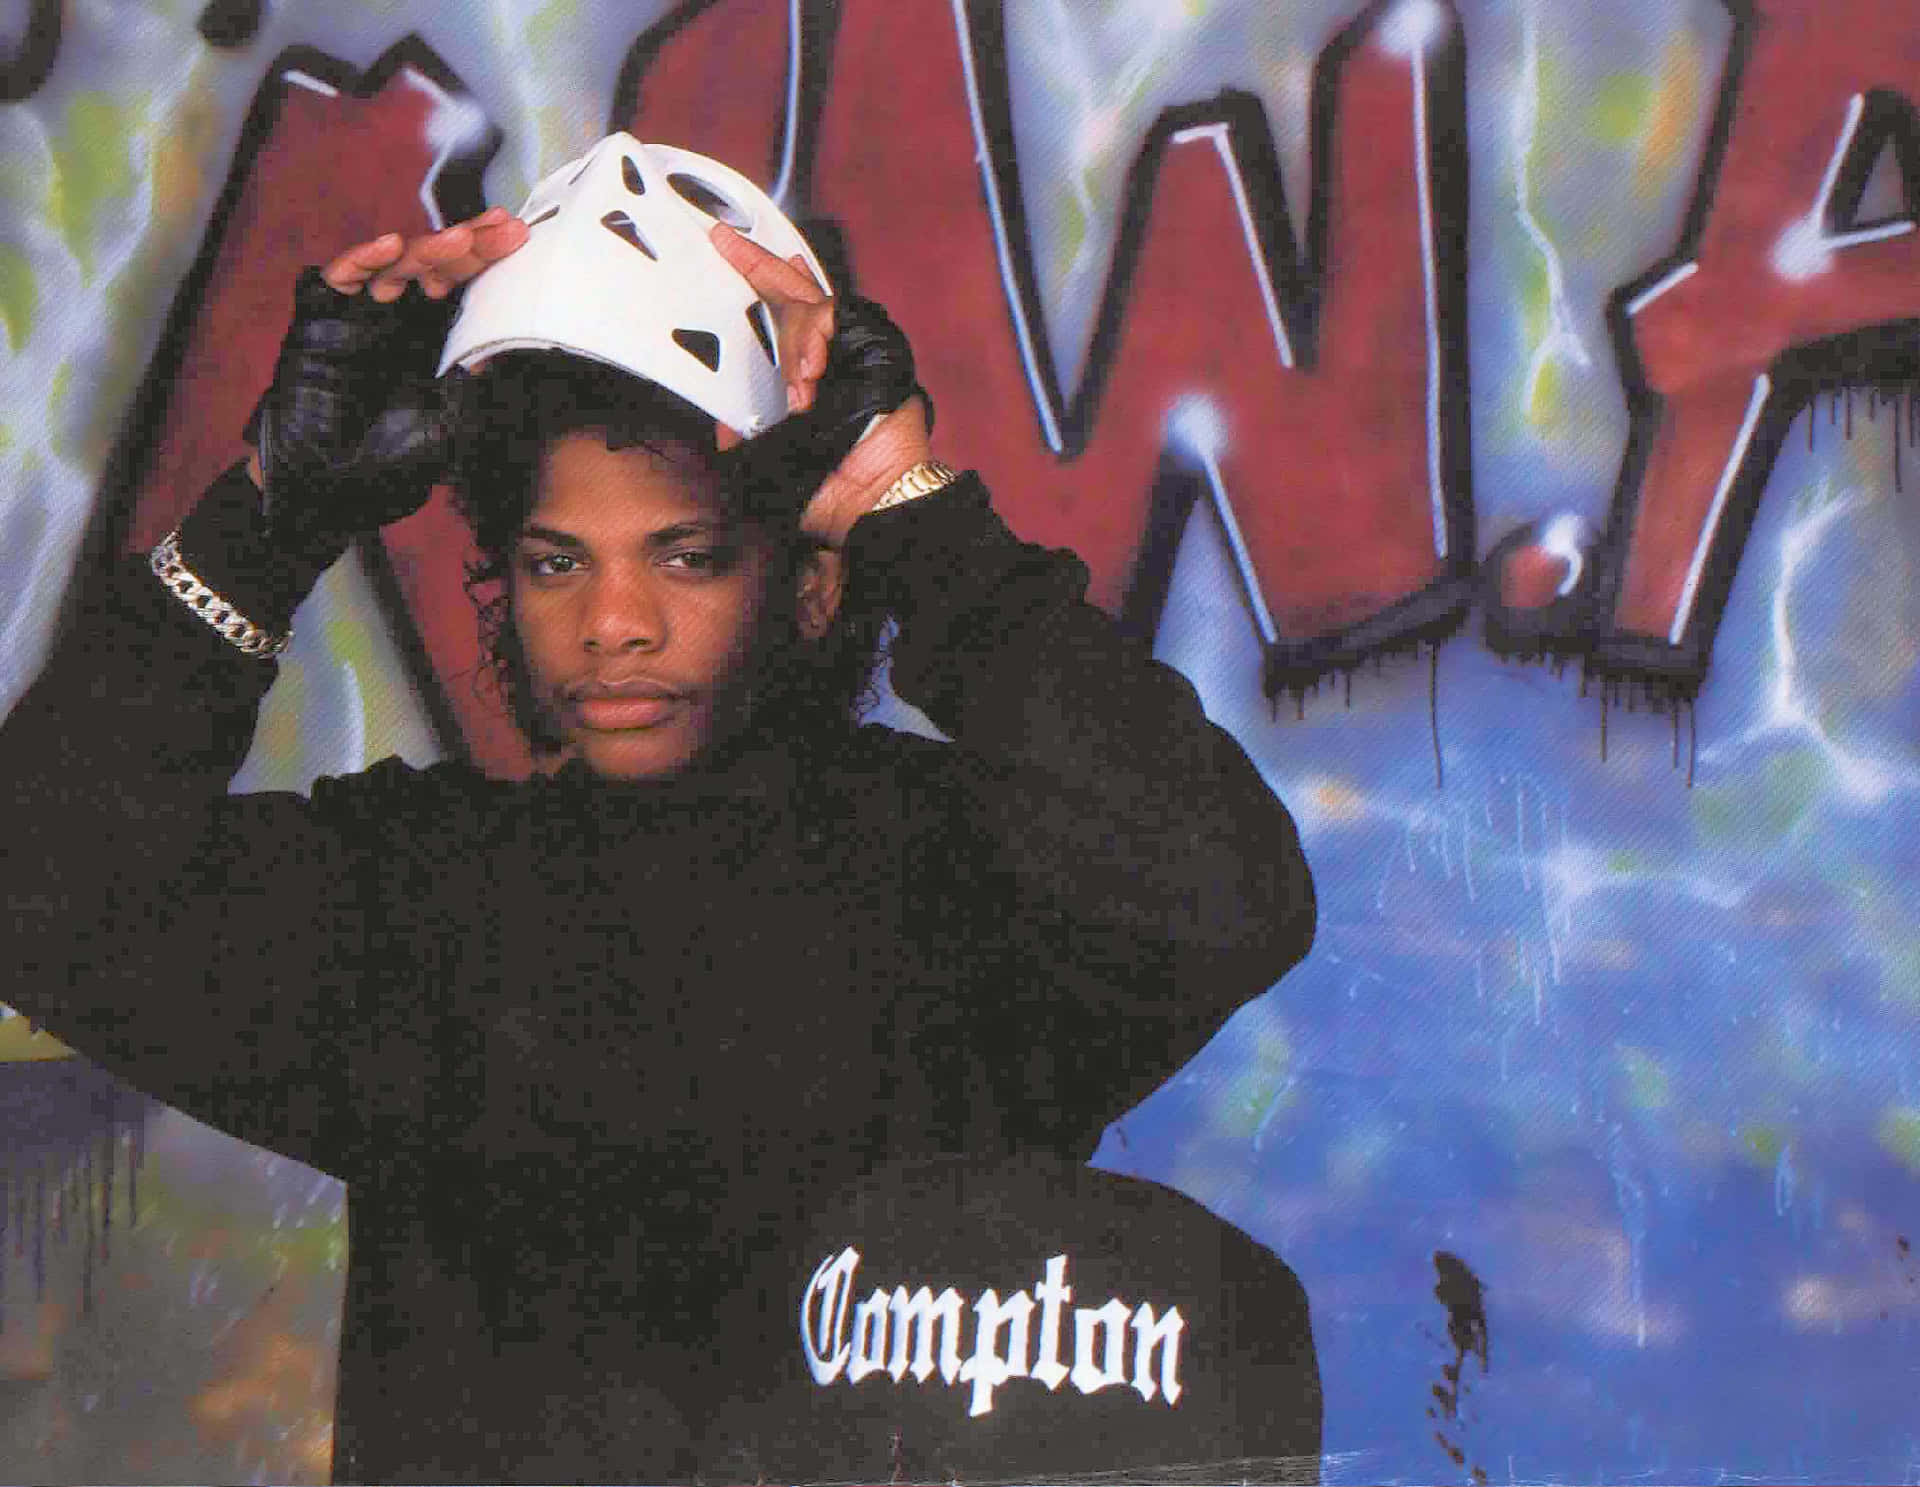 Legendary rapper Eazy-E on stage during a performance. Wallpaper